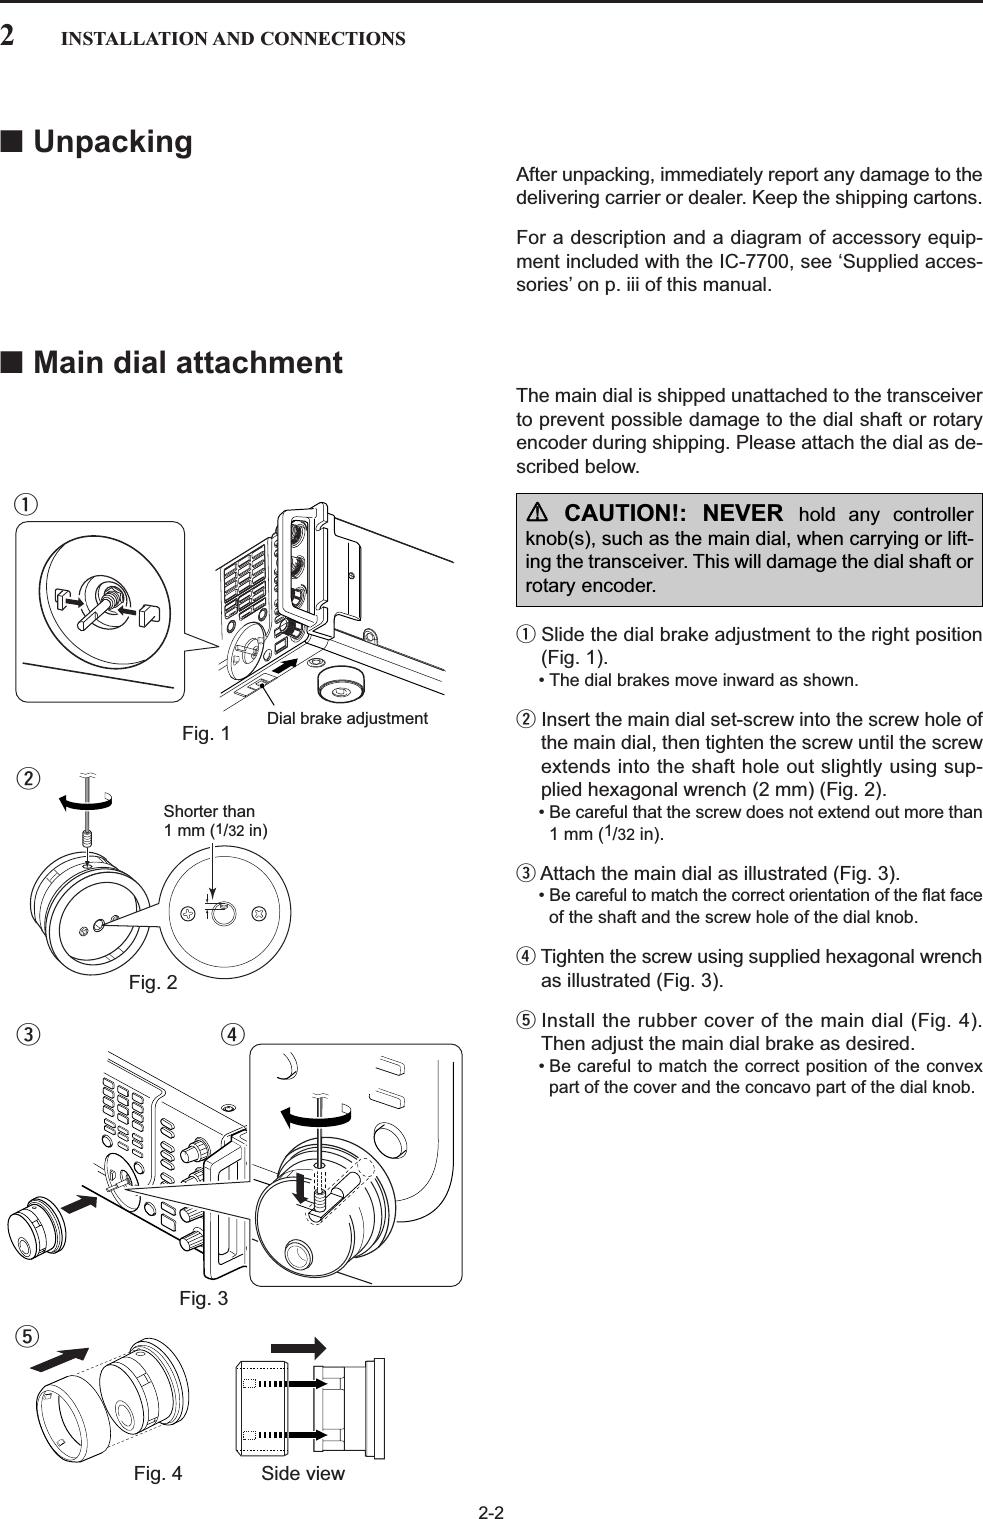 2-2■UnpackingAfter unpacking, immediately report any damage to thedelivering carrier or dealer. Keep the shipping cartons.For a description and a diagram of accessory equip-ment included with the IC-7700, see ‘Supplied acces-sories’ on p. iii of this manual.■Main dial attachmentThe main dial is shipped unattached to the transceiverto prevent possible damage to the dial shaft or rotaryencoder during shipping. Please attach the dial as de-scribed below.qSlide the dial brake adjustment to the right position(Fig. 1).• The dial brakes move inward as shown.wInsert the main dial set-screw into the screw hole ofthe main dial, then tighten the screw until the screwextends into the shaft hole out slightly using sup-plied hexagonal wrench (2 mm) (Fig. 2).• Be careful that the screw does not extend out more than1 mm (1/32 in).eAttach the main dial as illustrated (Fig. 3).• Be careful to match the correct orientation of the flat faceof the shaft and the screw hole of the dial knob.rTighten the screw using supplied hexagonal wrenchas illustrated (Fig. 3).tInstall the rubber cover of the main dial (Fig. 4).Then adjust the main dial brake as desired.• Be careful to match the correct position of the convexpart of the cover and the concavo part of the dial knob.2INSTALLATION AND CONNECTIONSDial brake adjustmentFig. 1qShorter than 1 mm (1/32 in)Fig. 2wFig. 3erRCAUTION!: NEVER hold any controllerknob(s), such as the main dial, when carrying or lift-ing the transceiver. This will damage the dial shaft orrotary encoder.Fig. 4 Side viewt